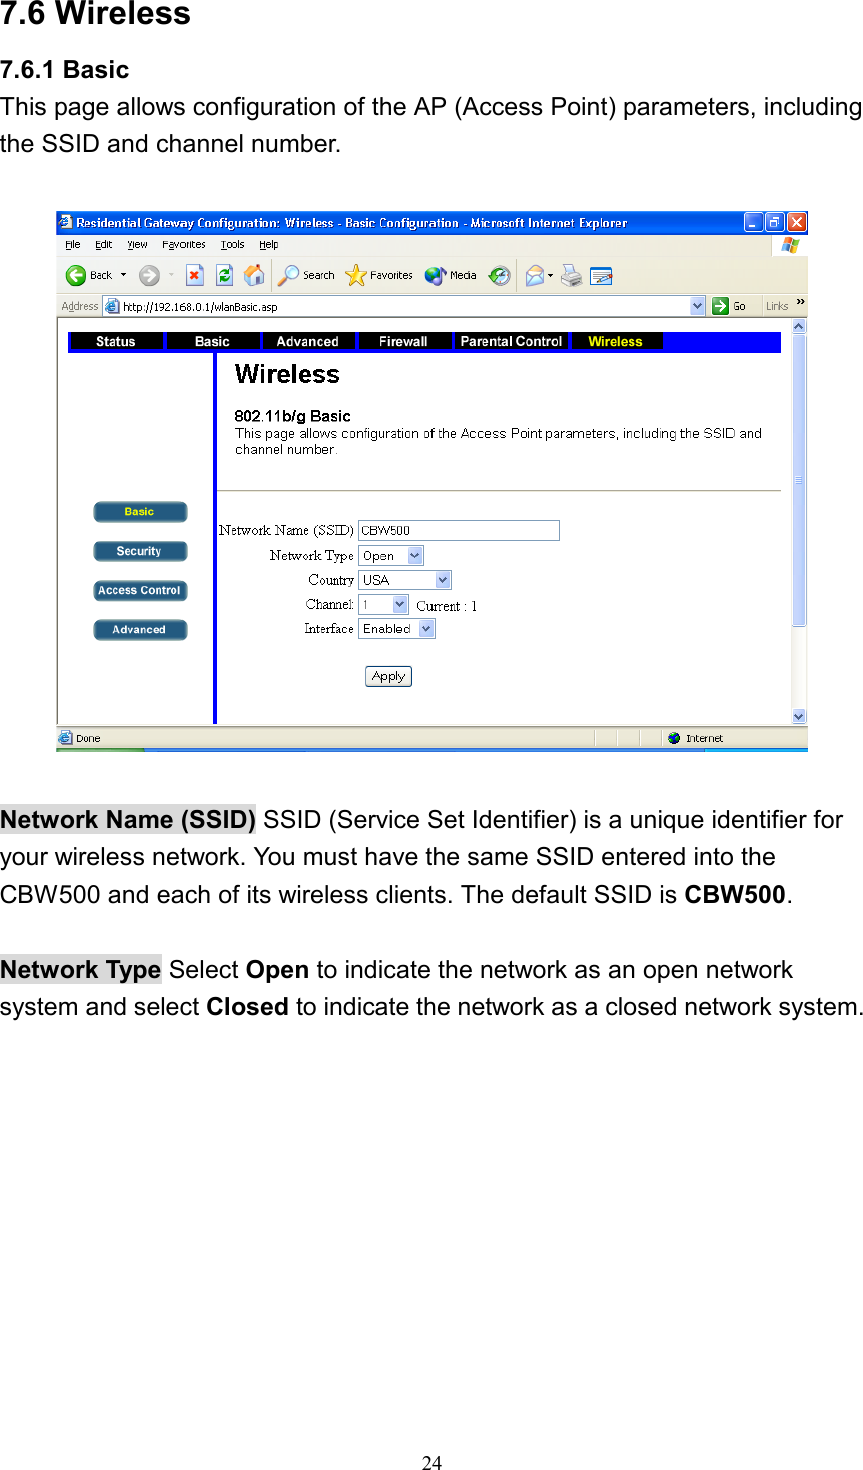 7.6 Wireless 7.6.1 Basic This page allows configuration of the AP (Access Point) parameters, including the SSID and channel number.    Network Name (SSID) SSID (Service Set Identifier) is a unique identifier for your wireless network. You must have the same SSID entered into the CBW500 and each of its wireless clients. The default SSID is CBW500.  Network Type Select Open to indicate the network as an open network system and select Closed to indicate the network as a closed network system.   24